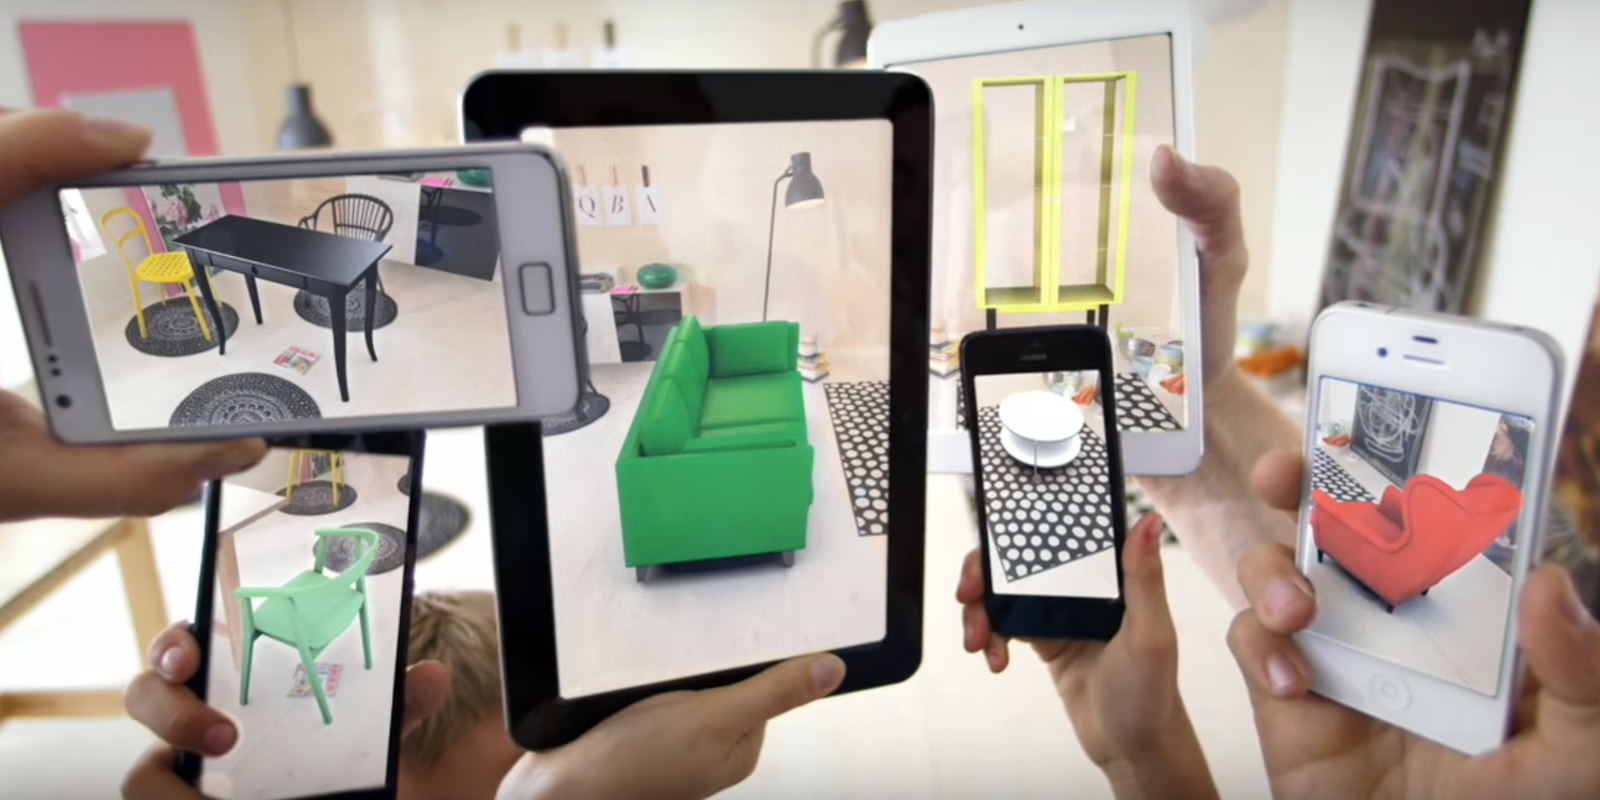 ikea place app augmented reality